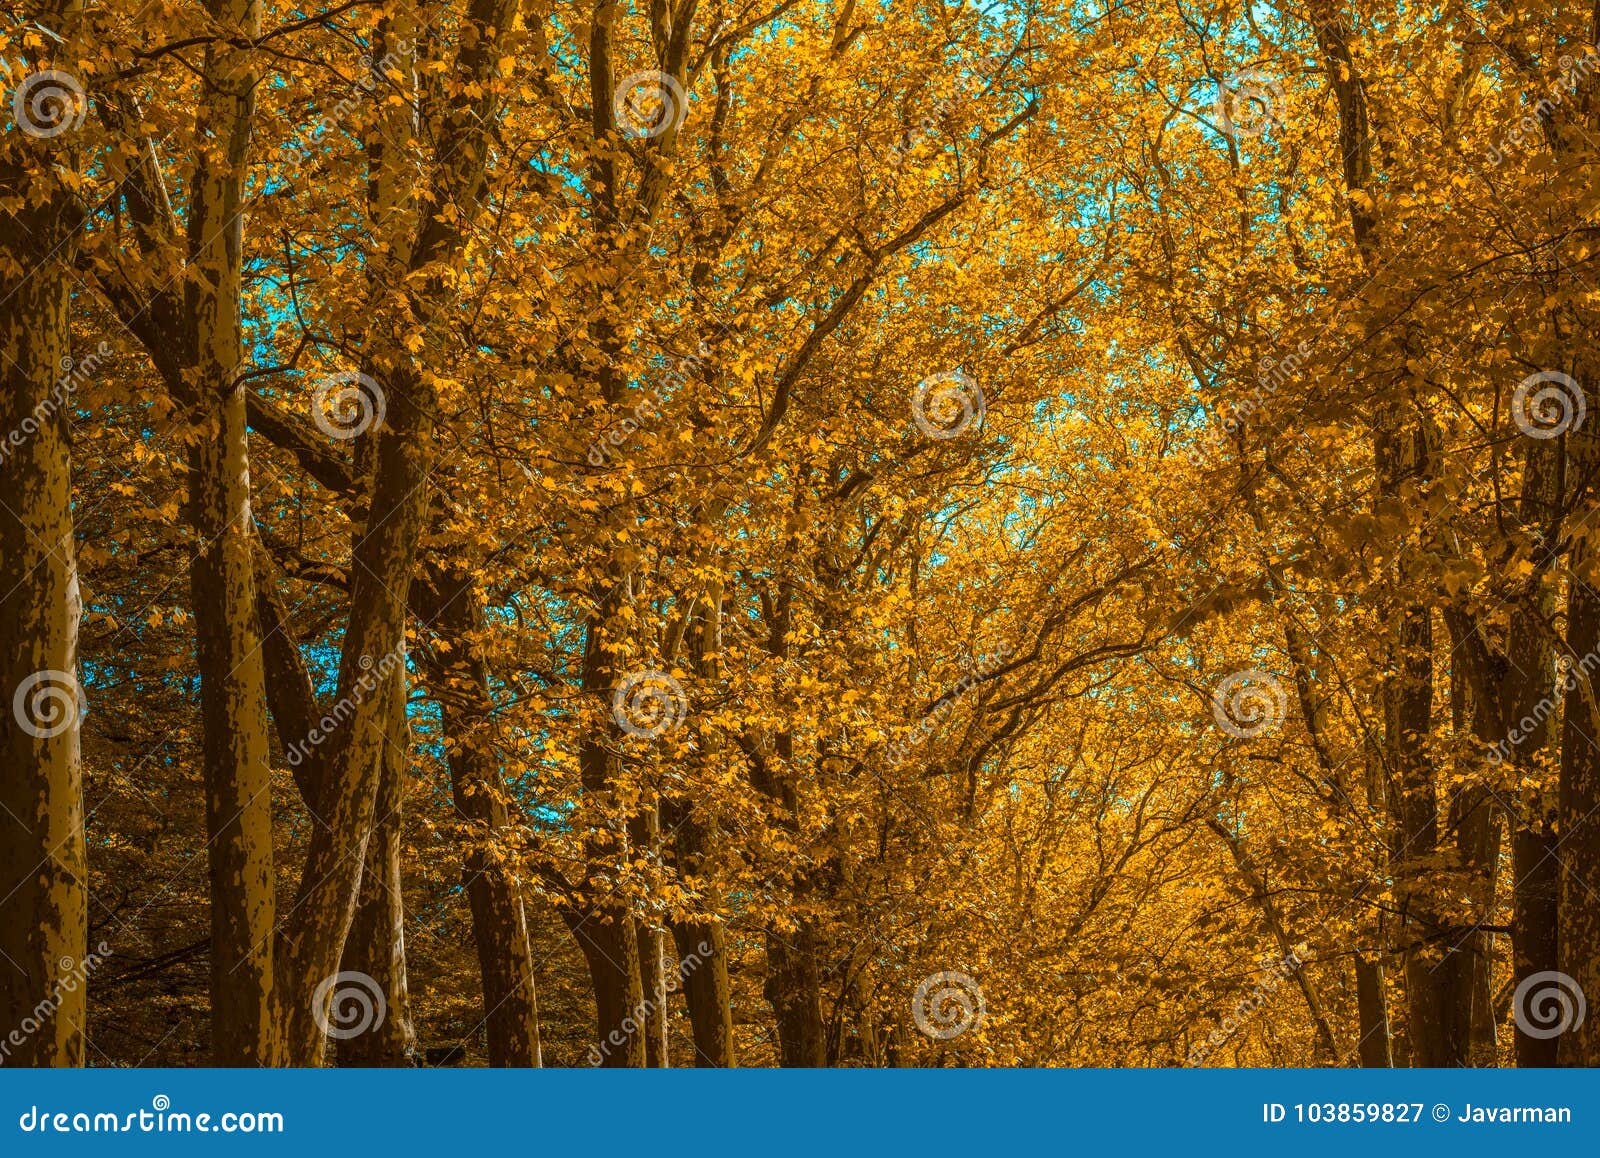 autunm trees in the park, perfect fall scenery